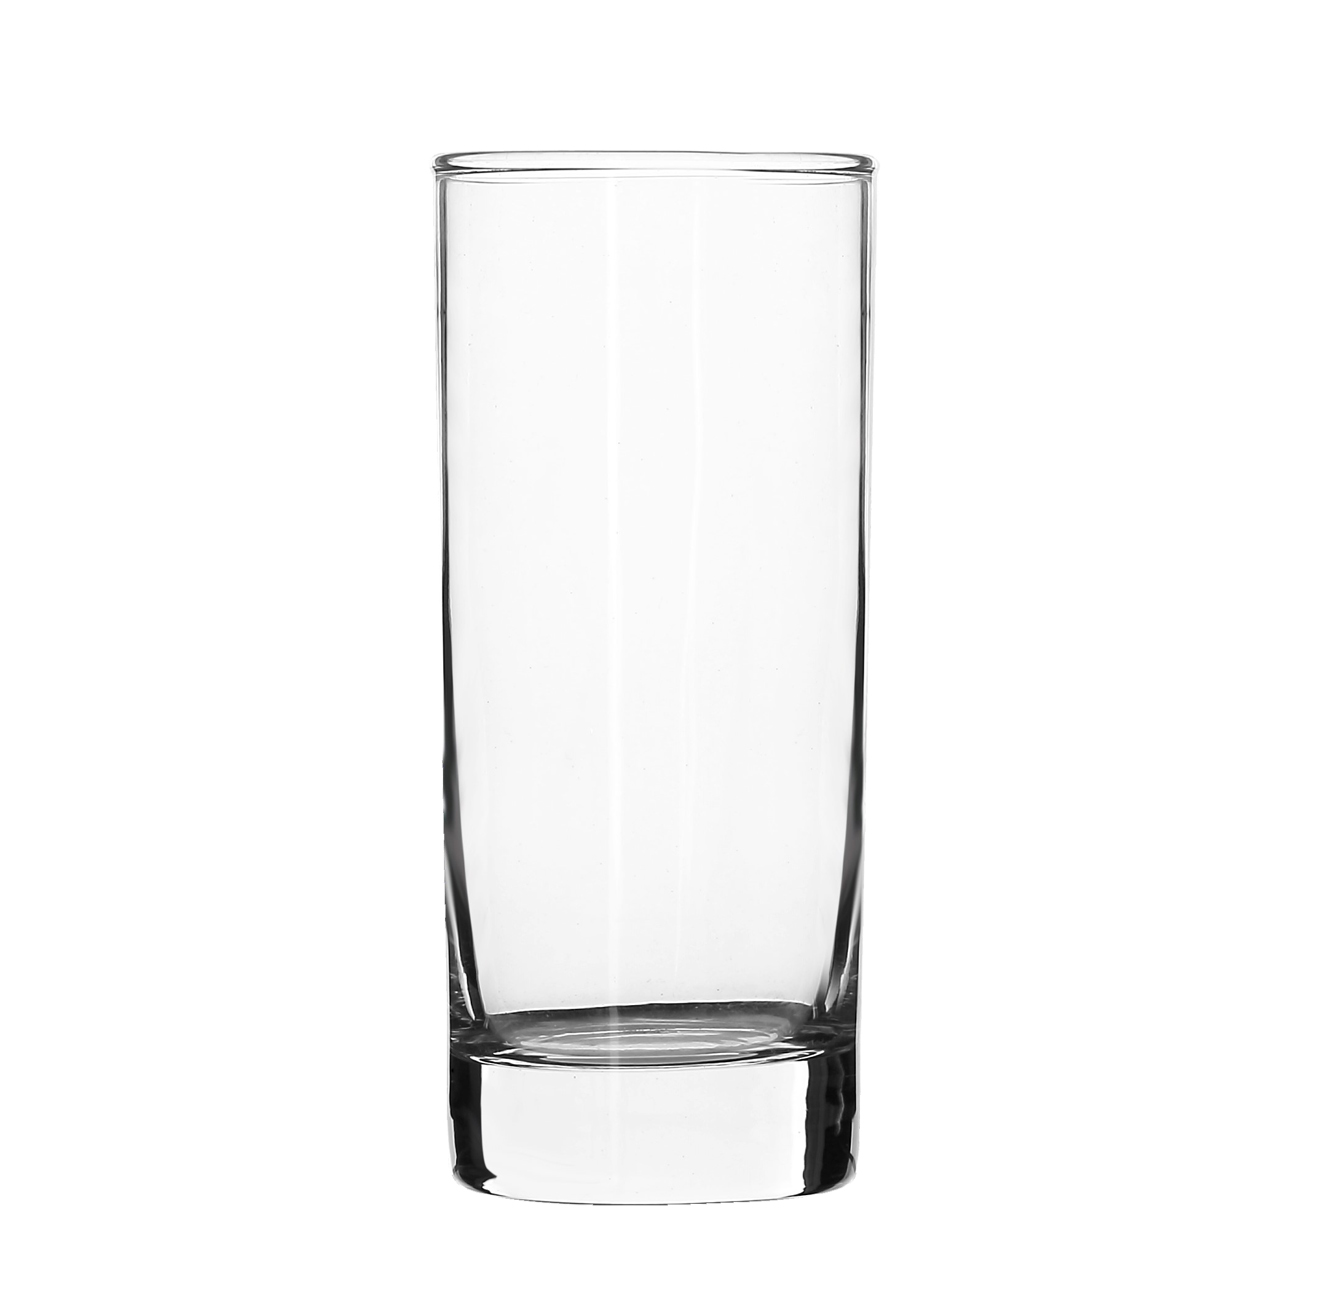 Drinking water glass